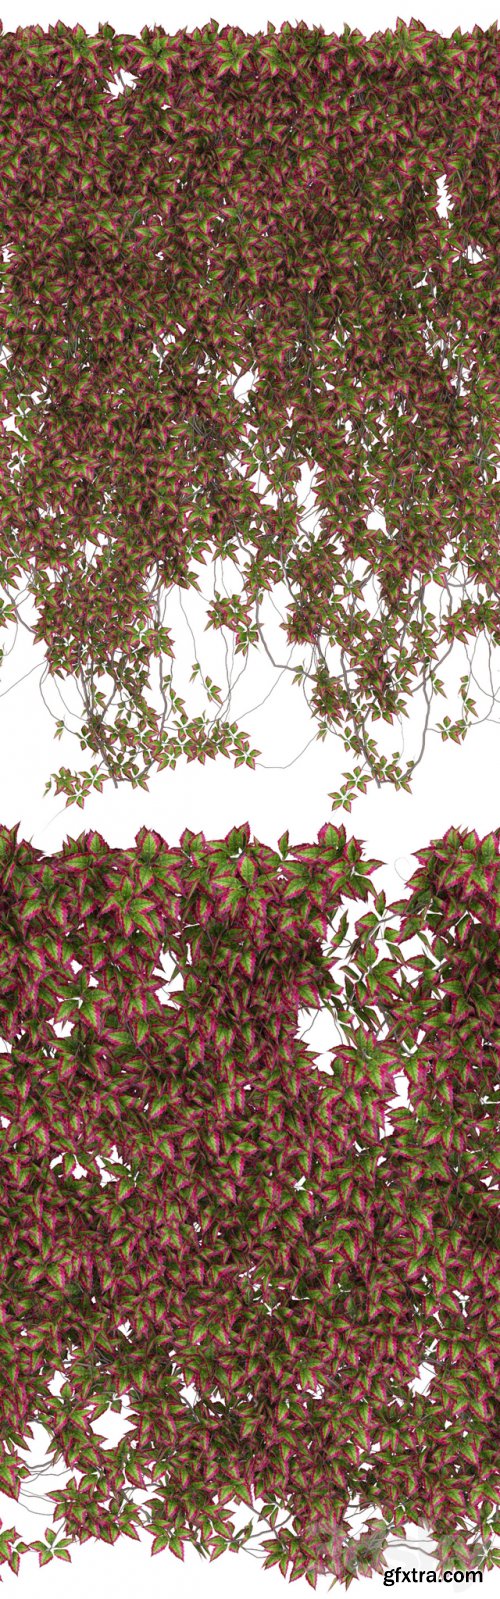 Wall of wild grapes leaves v3